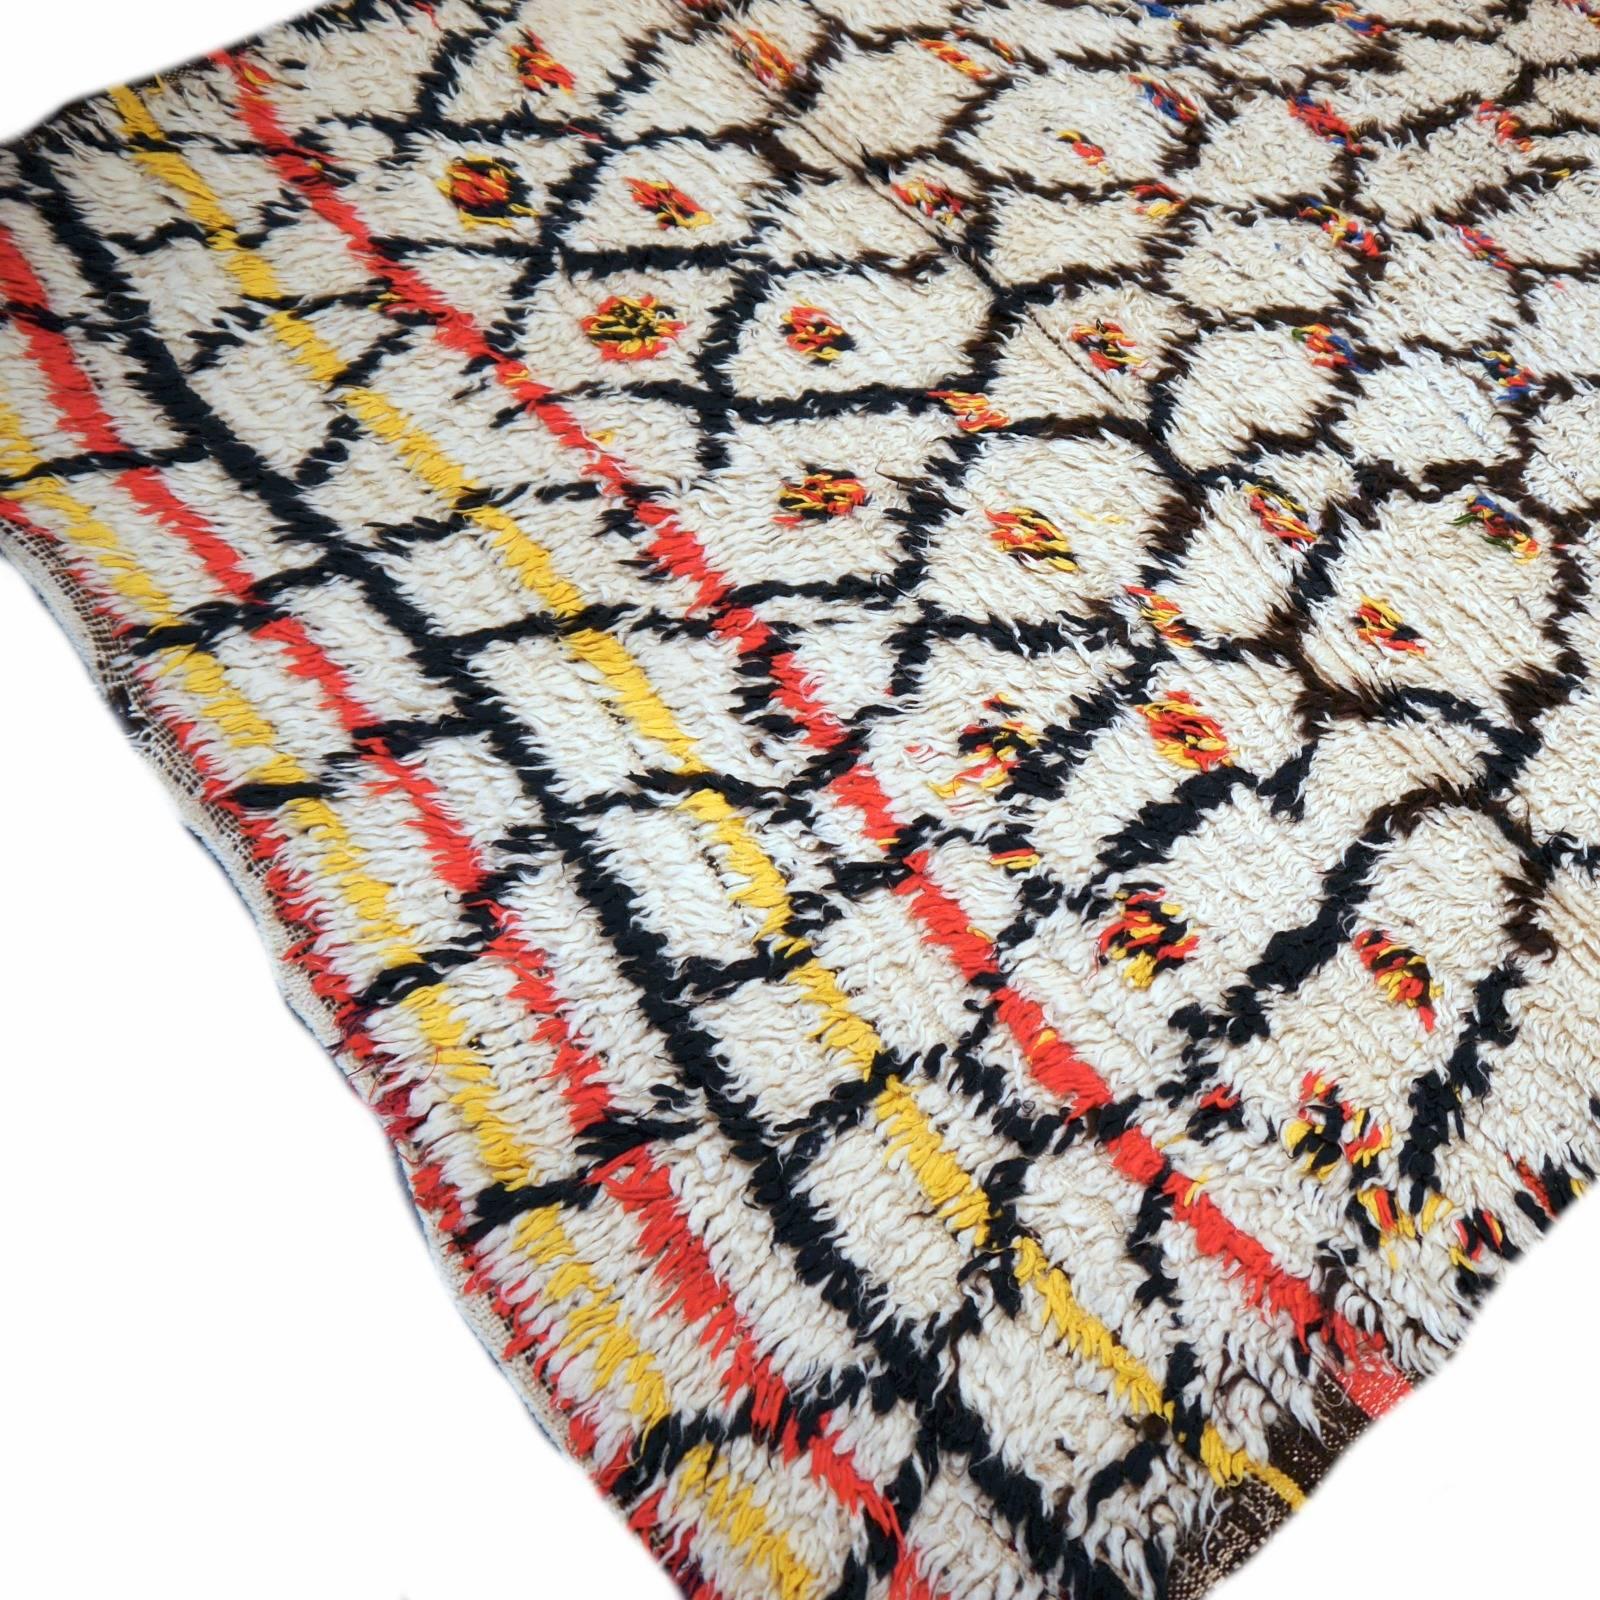 Very beautiful vintage Moroccan tribal carpet. Hand knotted by tribal women in the Moroccan mountains. Joyful colors and design.

The Djoharian Design Collection is located in Germany, all our rugs are shipped from there. We are licensed FAIR-TRADE